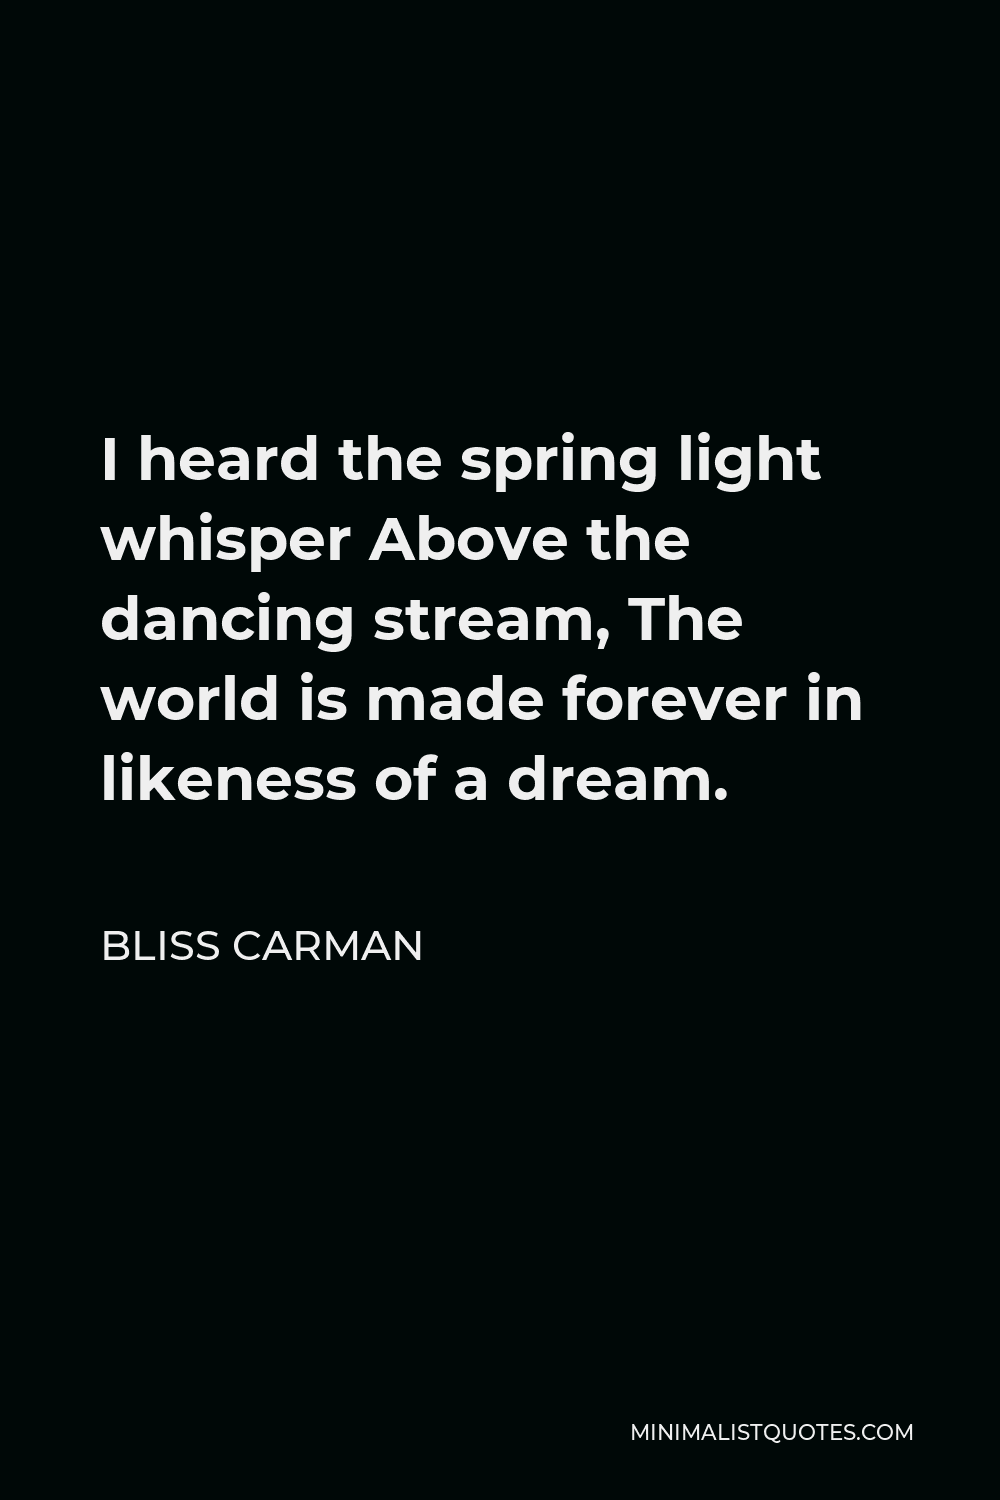 Bliss Carman Quote - I heard the spring light whisper Above the dancing stream, The world is made forever in likeness of a dream.